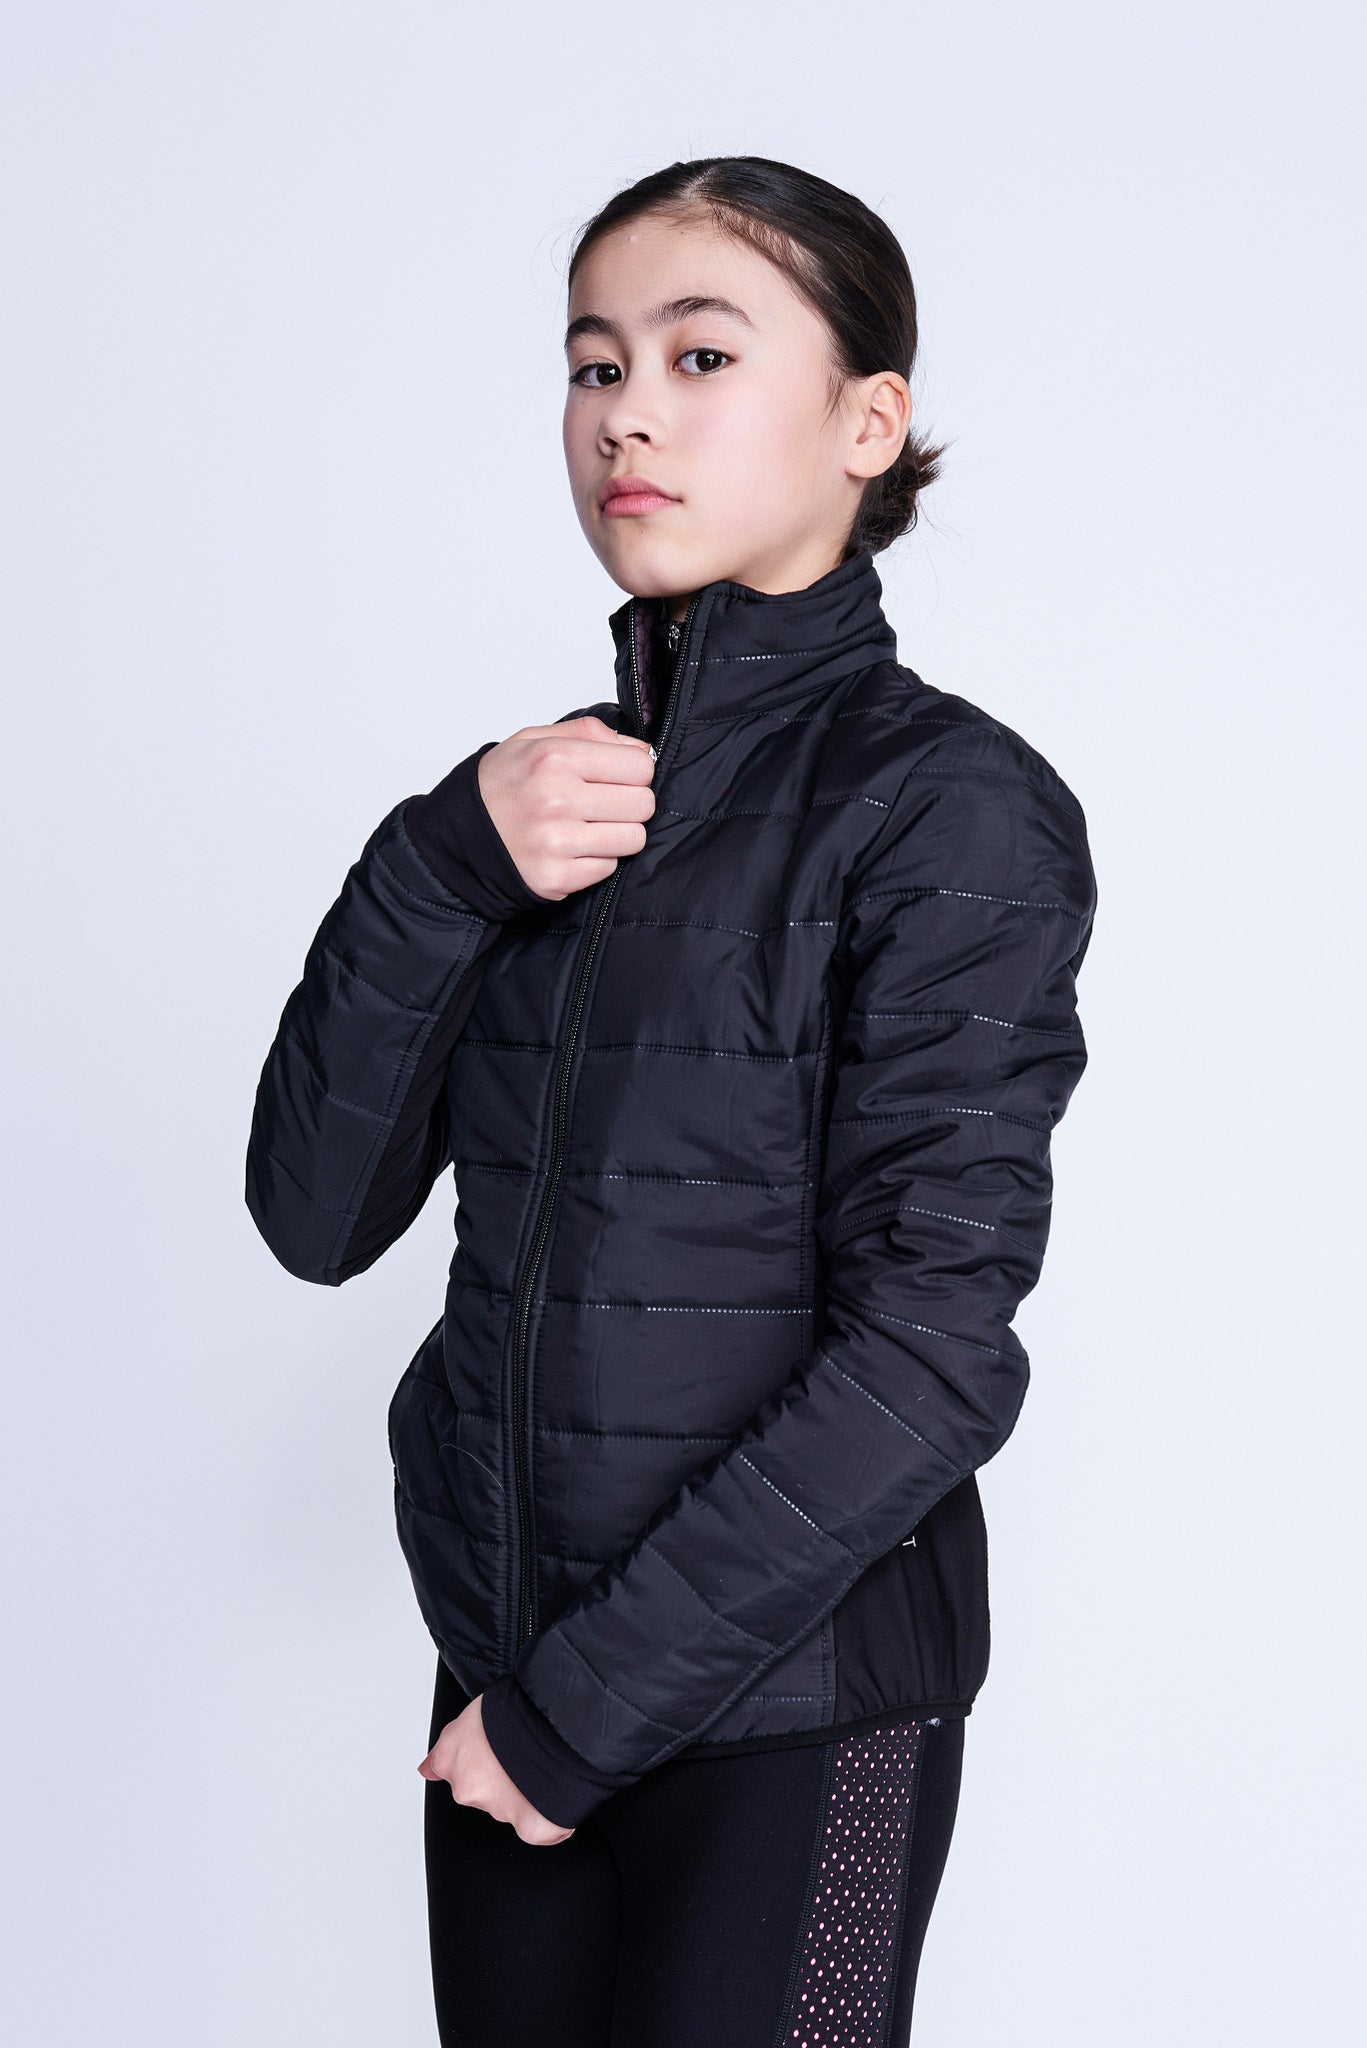 Chique Sport Train to Win Jacket Review 